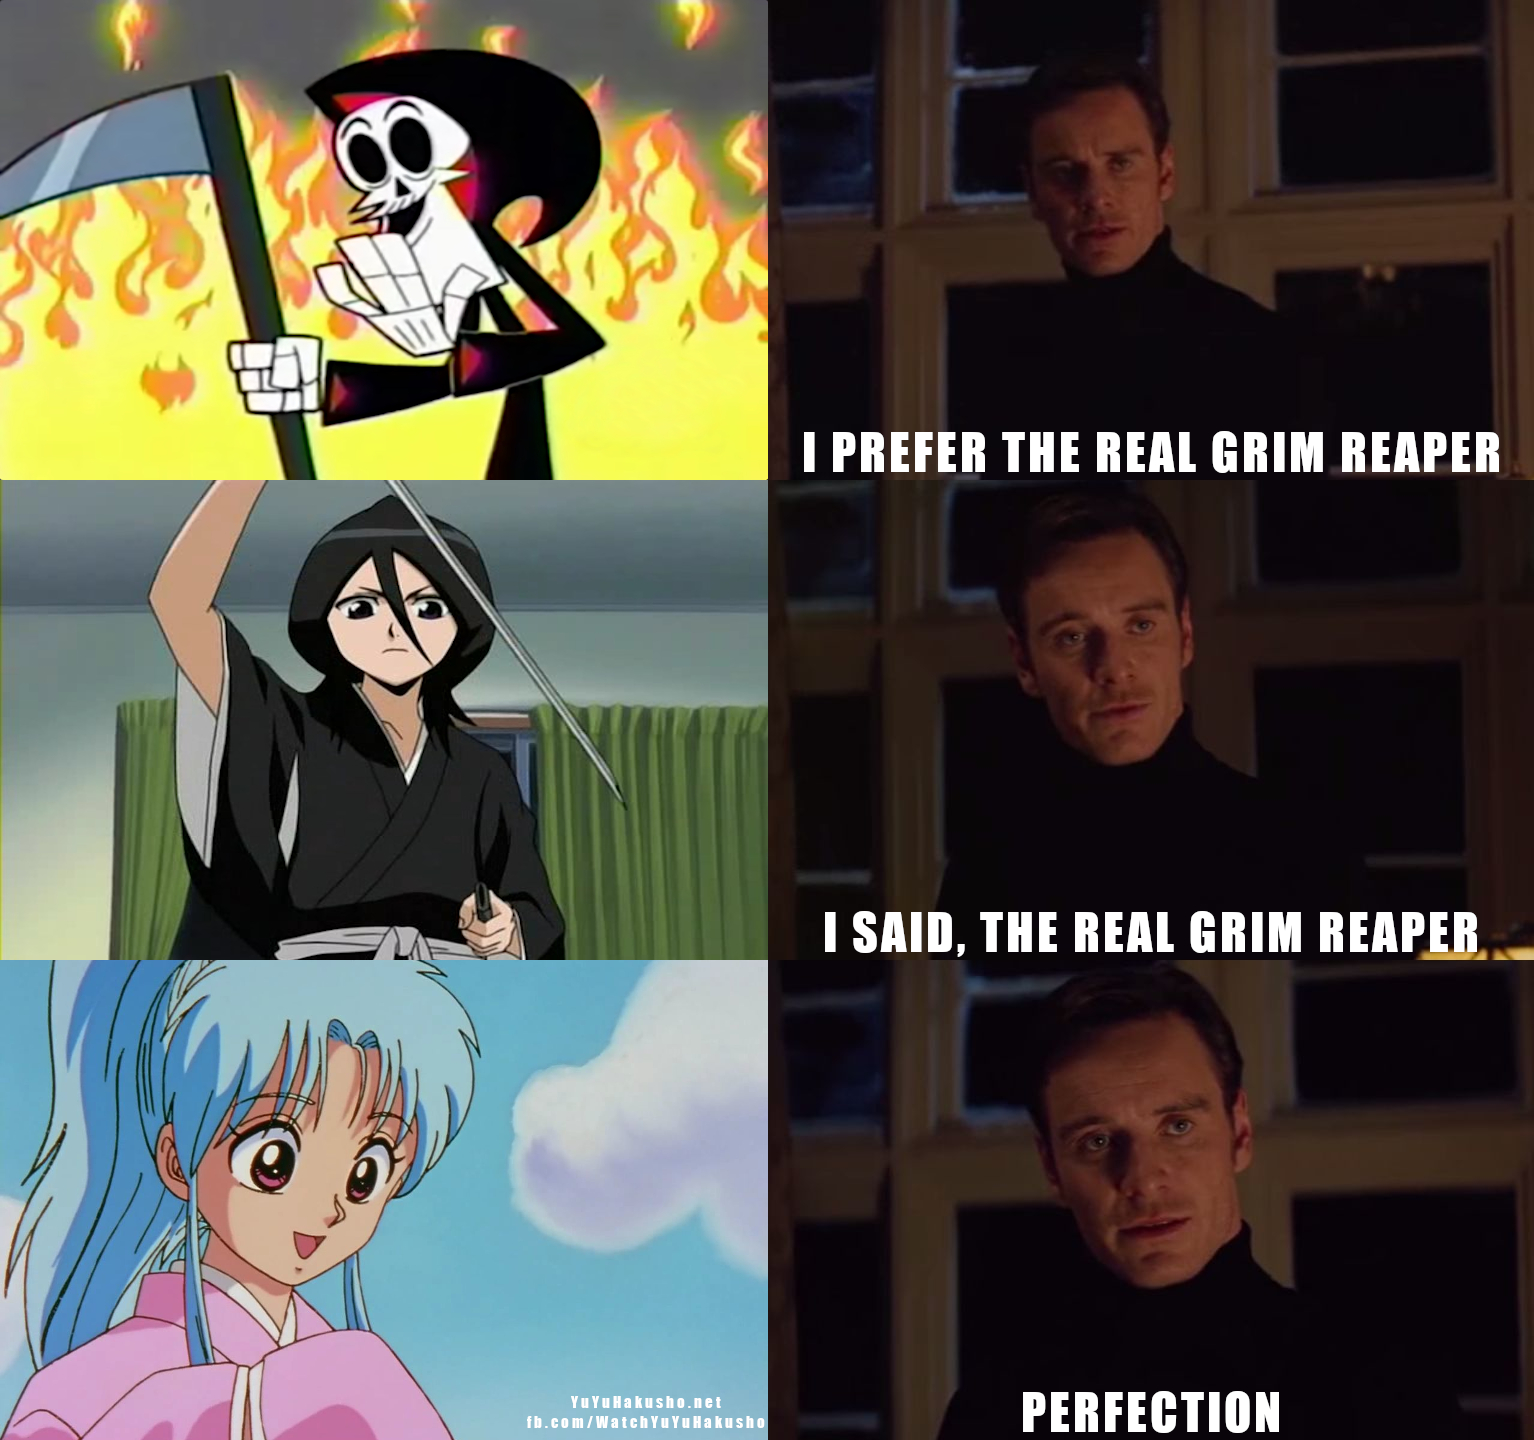 MEME: The Perfect Grim Reaper - The Unofficial Home of Yu Yu Hakusho